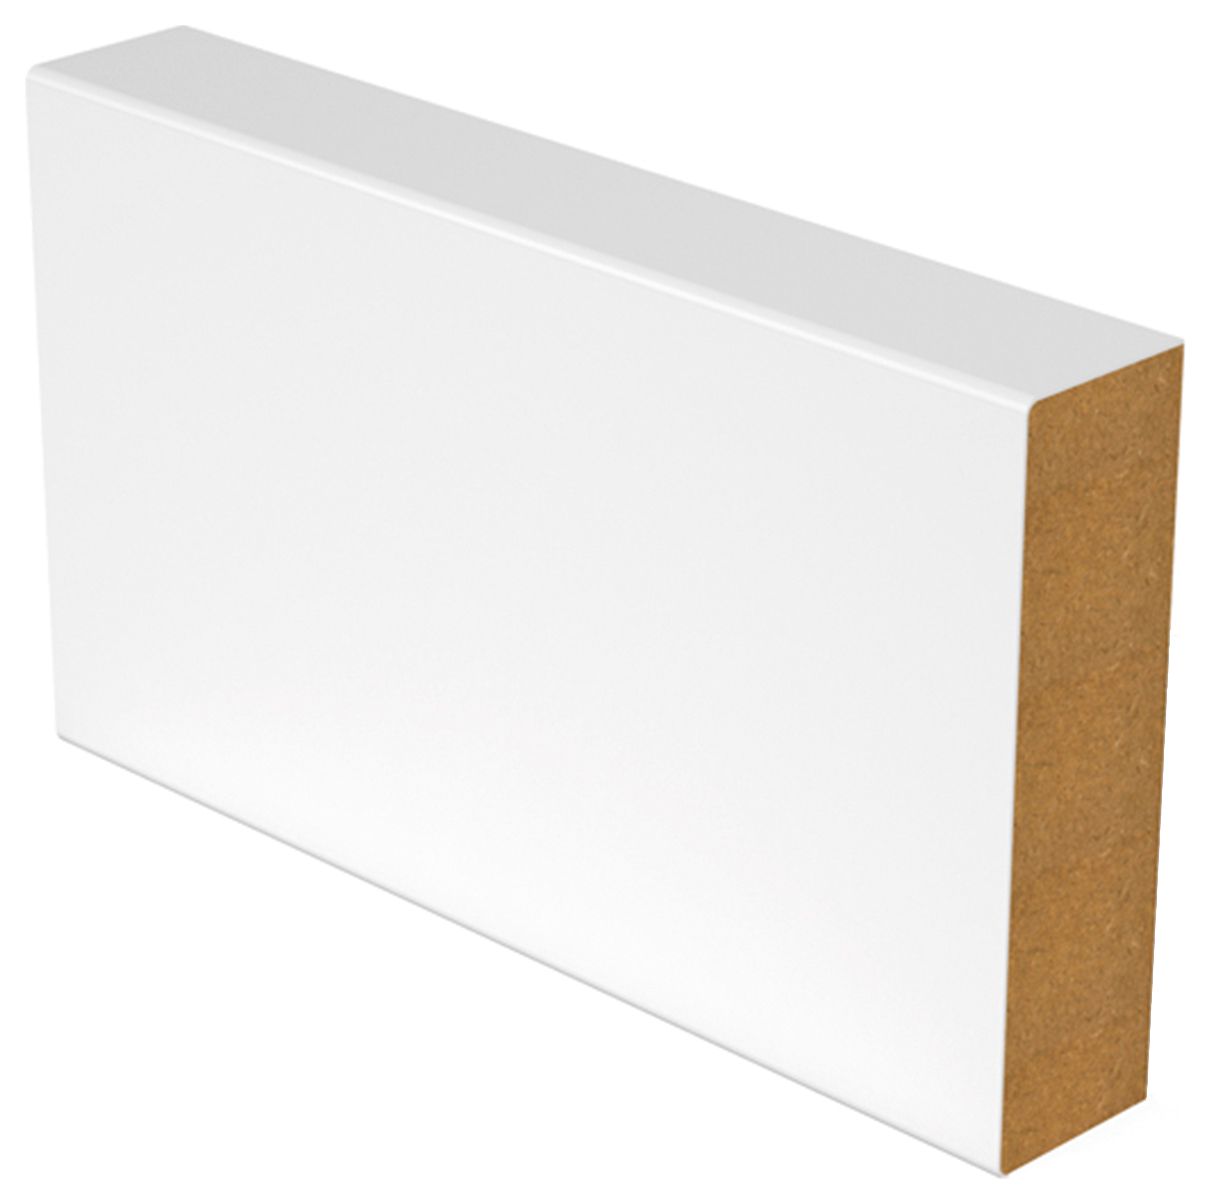 Image of Wickes Square Edge White MDF Skirting - 18 x 144 x 4200mm